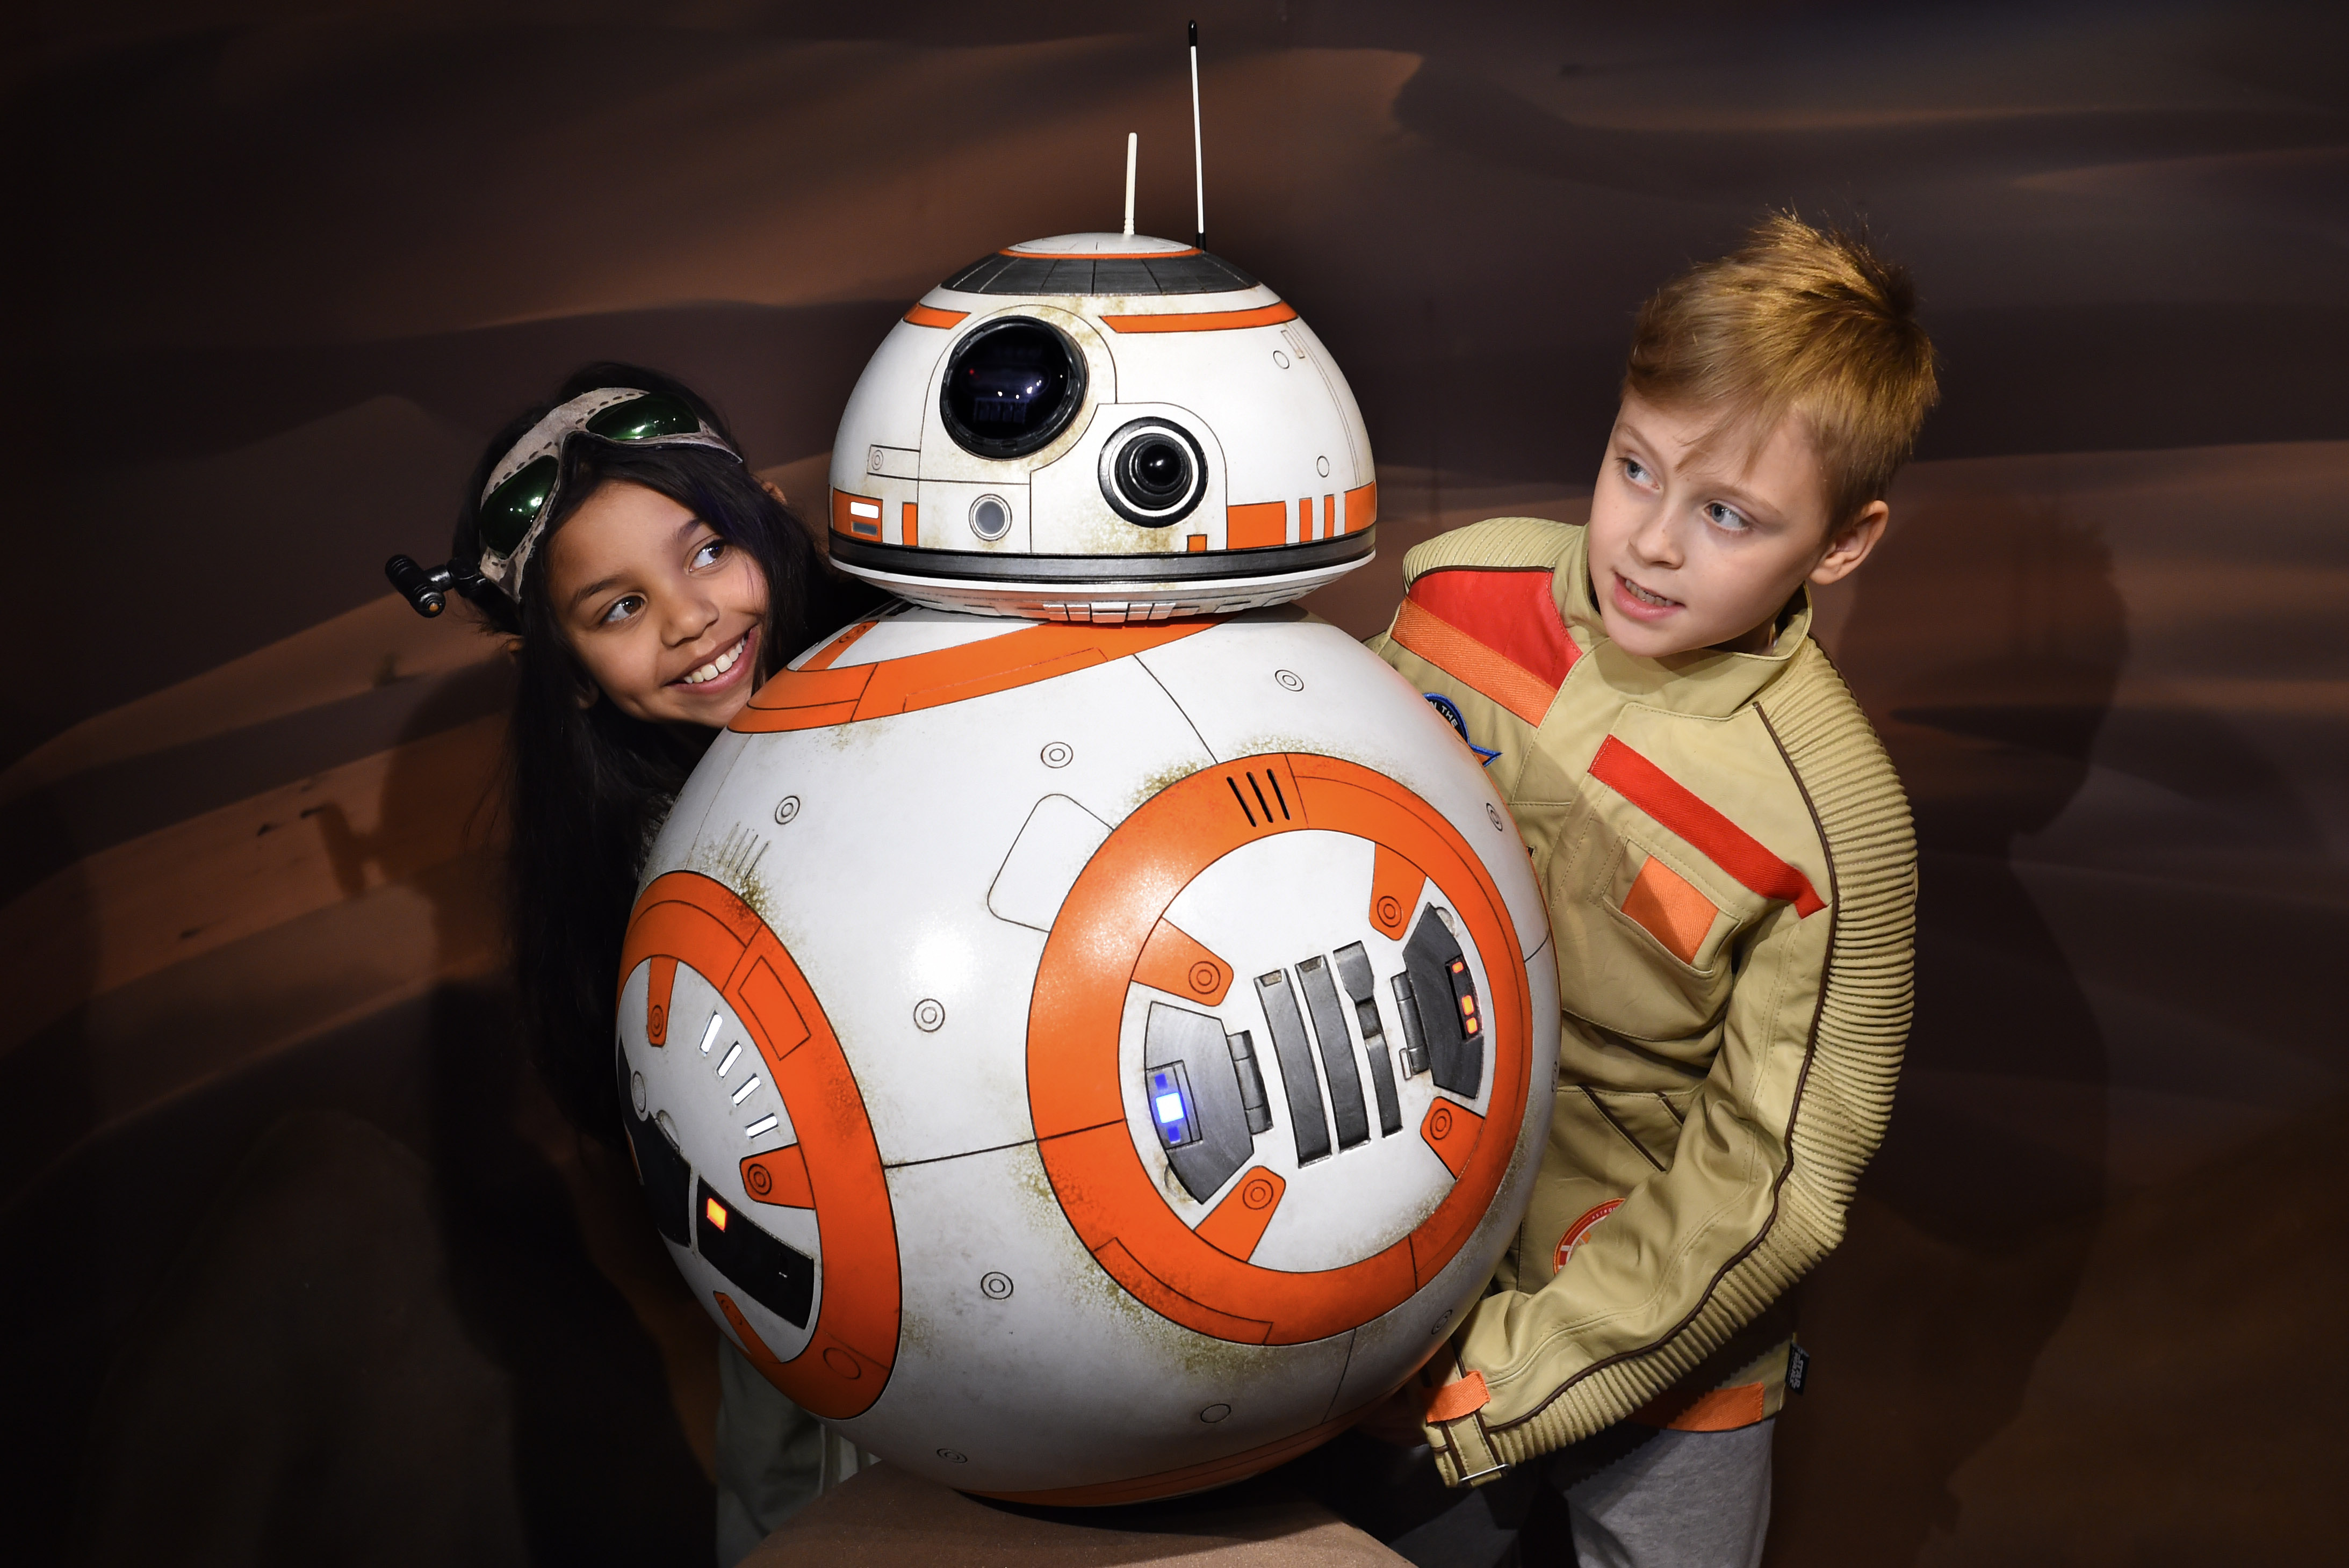 Star Wars fans pose with the new BB8 figure unveiled at Madame Tussauds London on March 21, 2016 in London. (credit: Stuart C. Wilson/Getty Images)